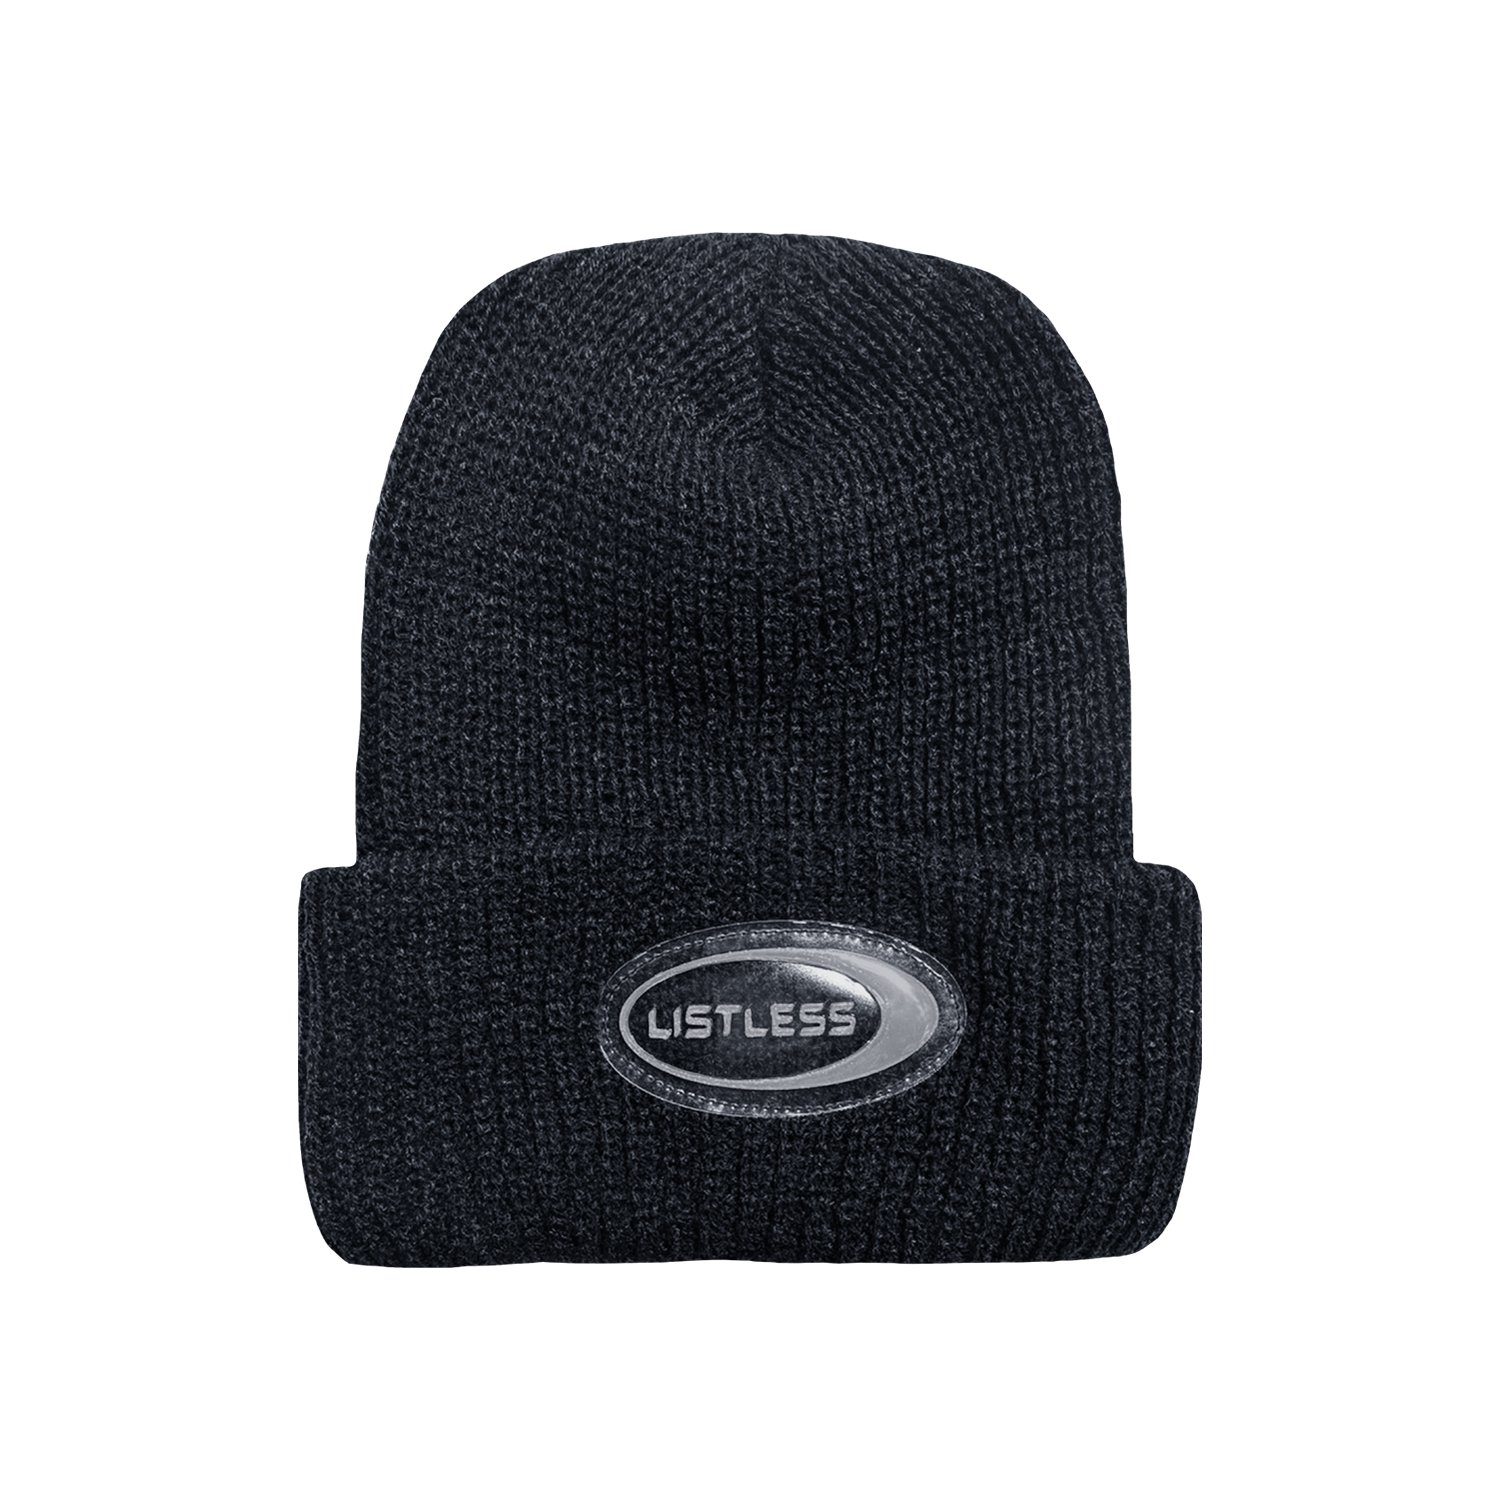 <img class='new_mark_img1' src='https://img.shop-pro.jp/img/new/icons2.gif' style='border:none;display:inline;margin:0px;padding:0px;width:auto;' />LISTLESS - soft knit hat（BLACK）